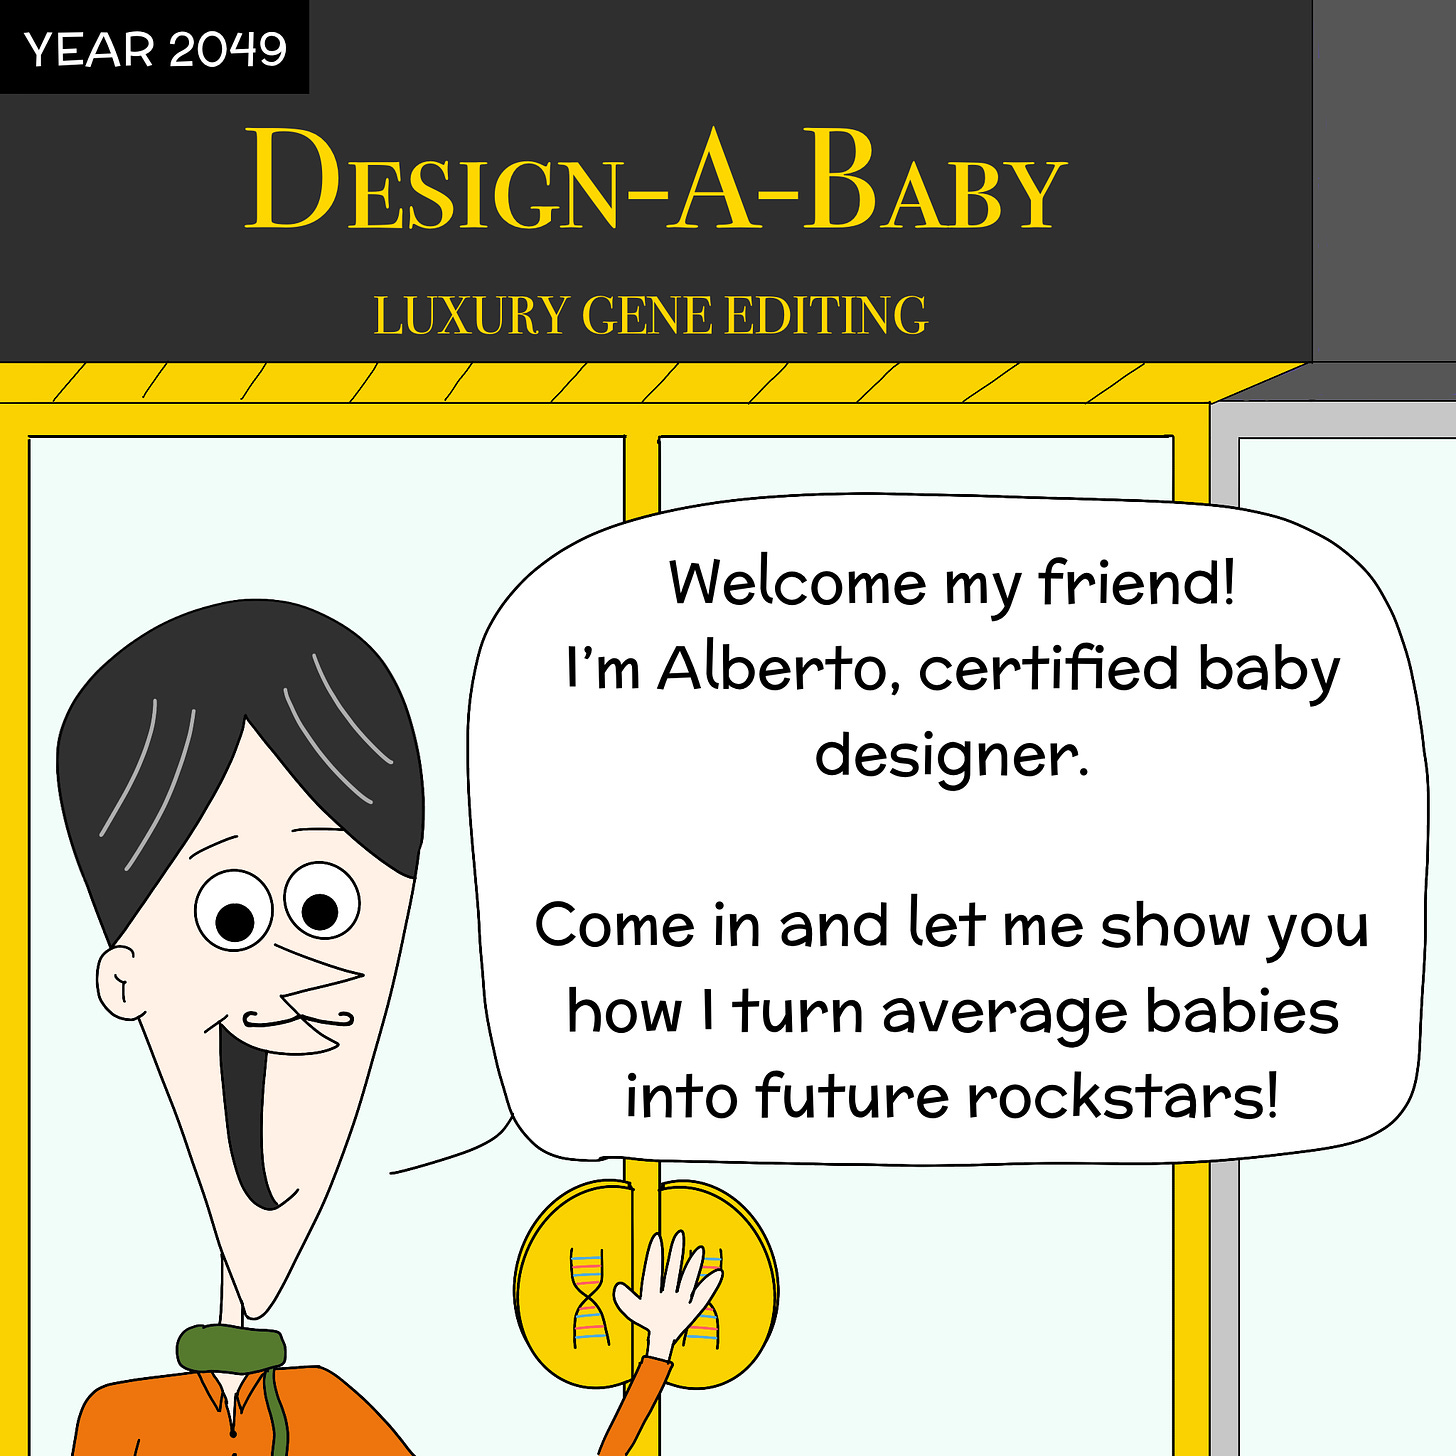 Panel 1: Standing outside of his "Design-A-Baby" luxury gene editing store, Alberto says: "Welcome my friend! I'm Alberto, certified baby designer. Come in and let me show you how I turn average babies into future rockstars!"